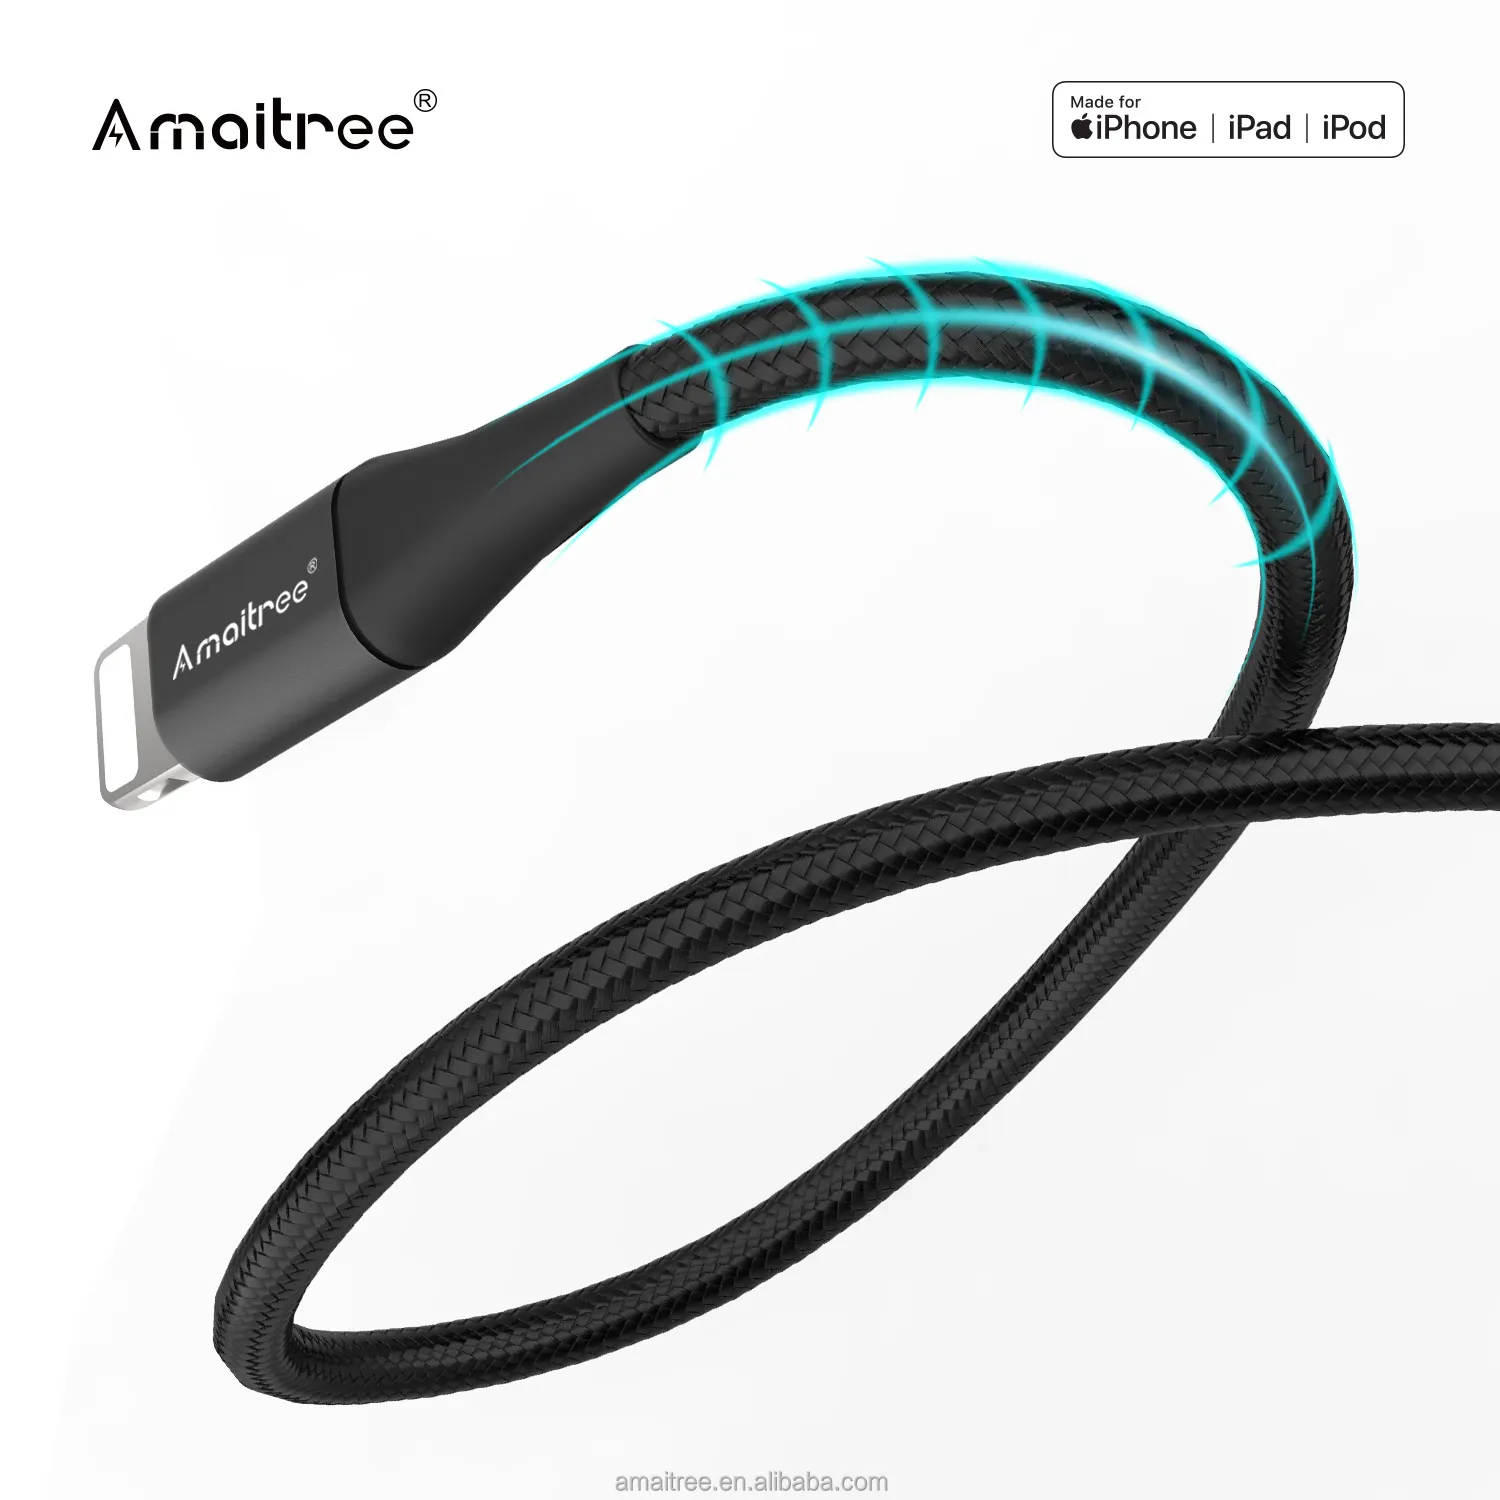 Amaitree MFi Certified Wholesale Price PD 60W 1.2M USB Type C to 8 Pin IOS Mobile Phone 3A Fast Charging Data Cable for iPhone